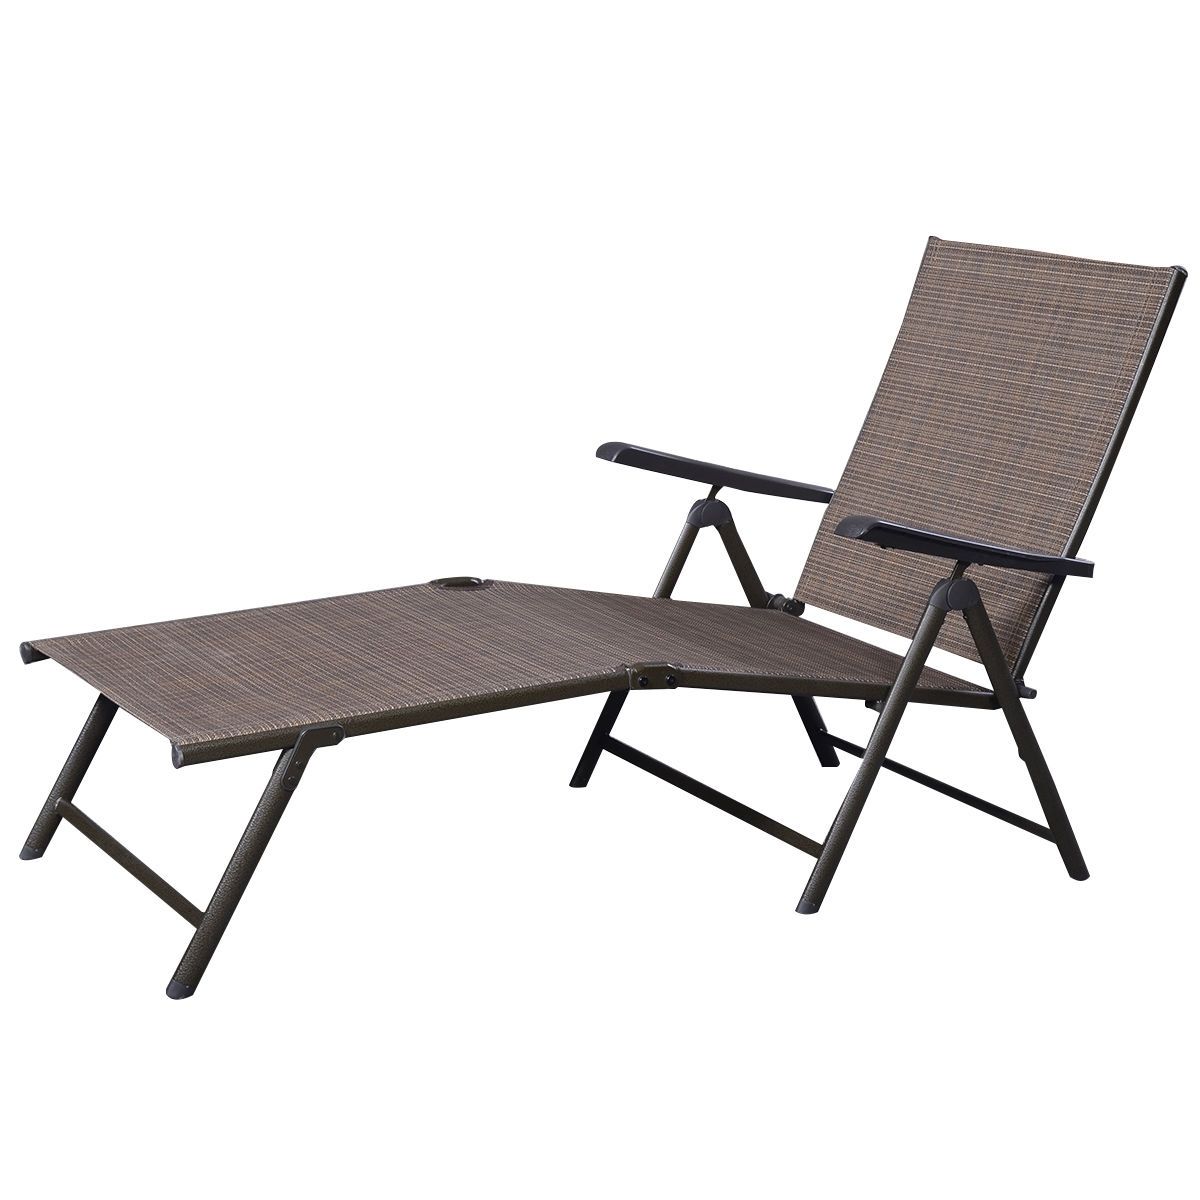 2018 Outdoor Adjustable Chaise Lounge Chair – Sunloungers – Outdoor With Regard To Adjustable Pool Chaise Lounge Chair Recliners (View 1 of 15)